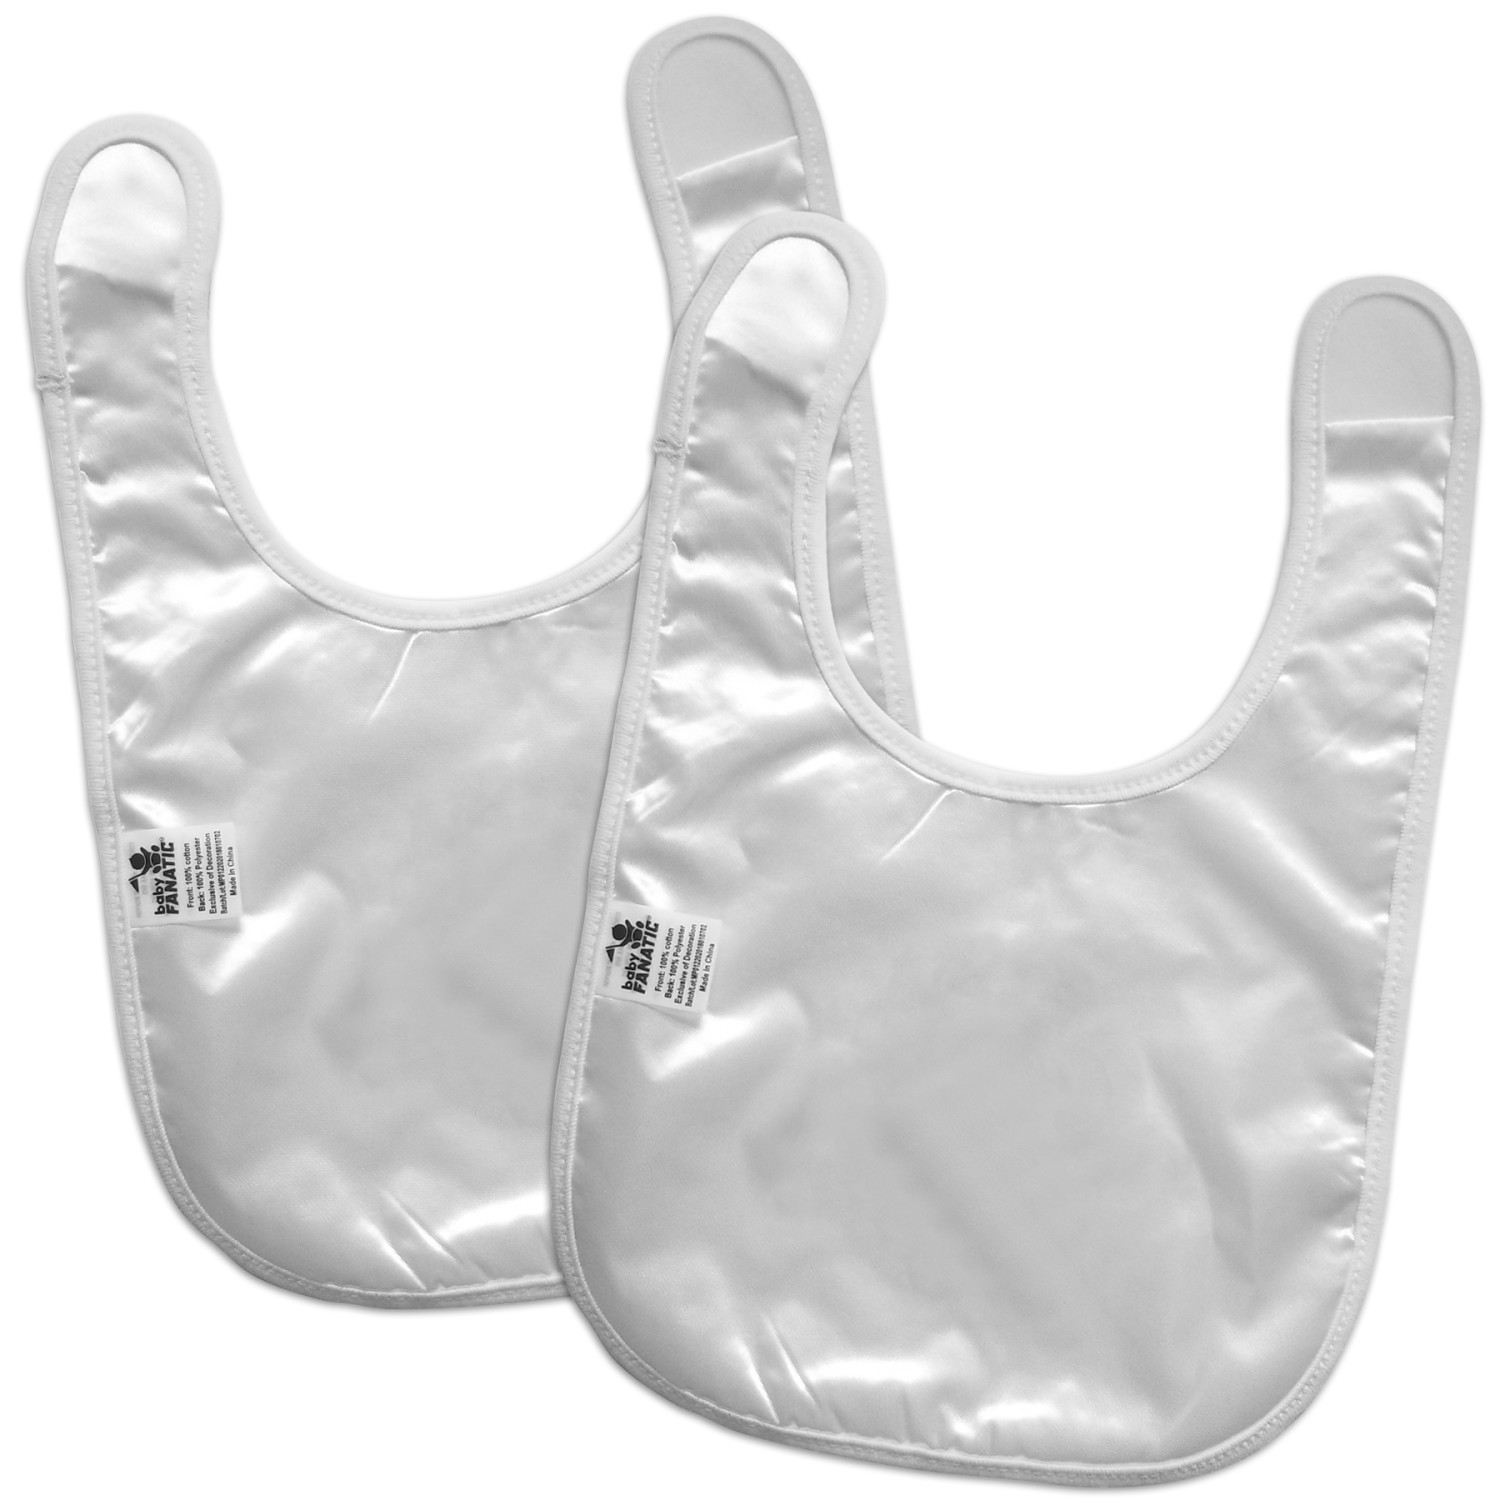 BabyFanatic Officially Licensed Unisex Baby Bibs 2 Pack - NCAA Baylor Bears - image 3 of 3